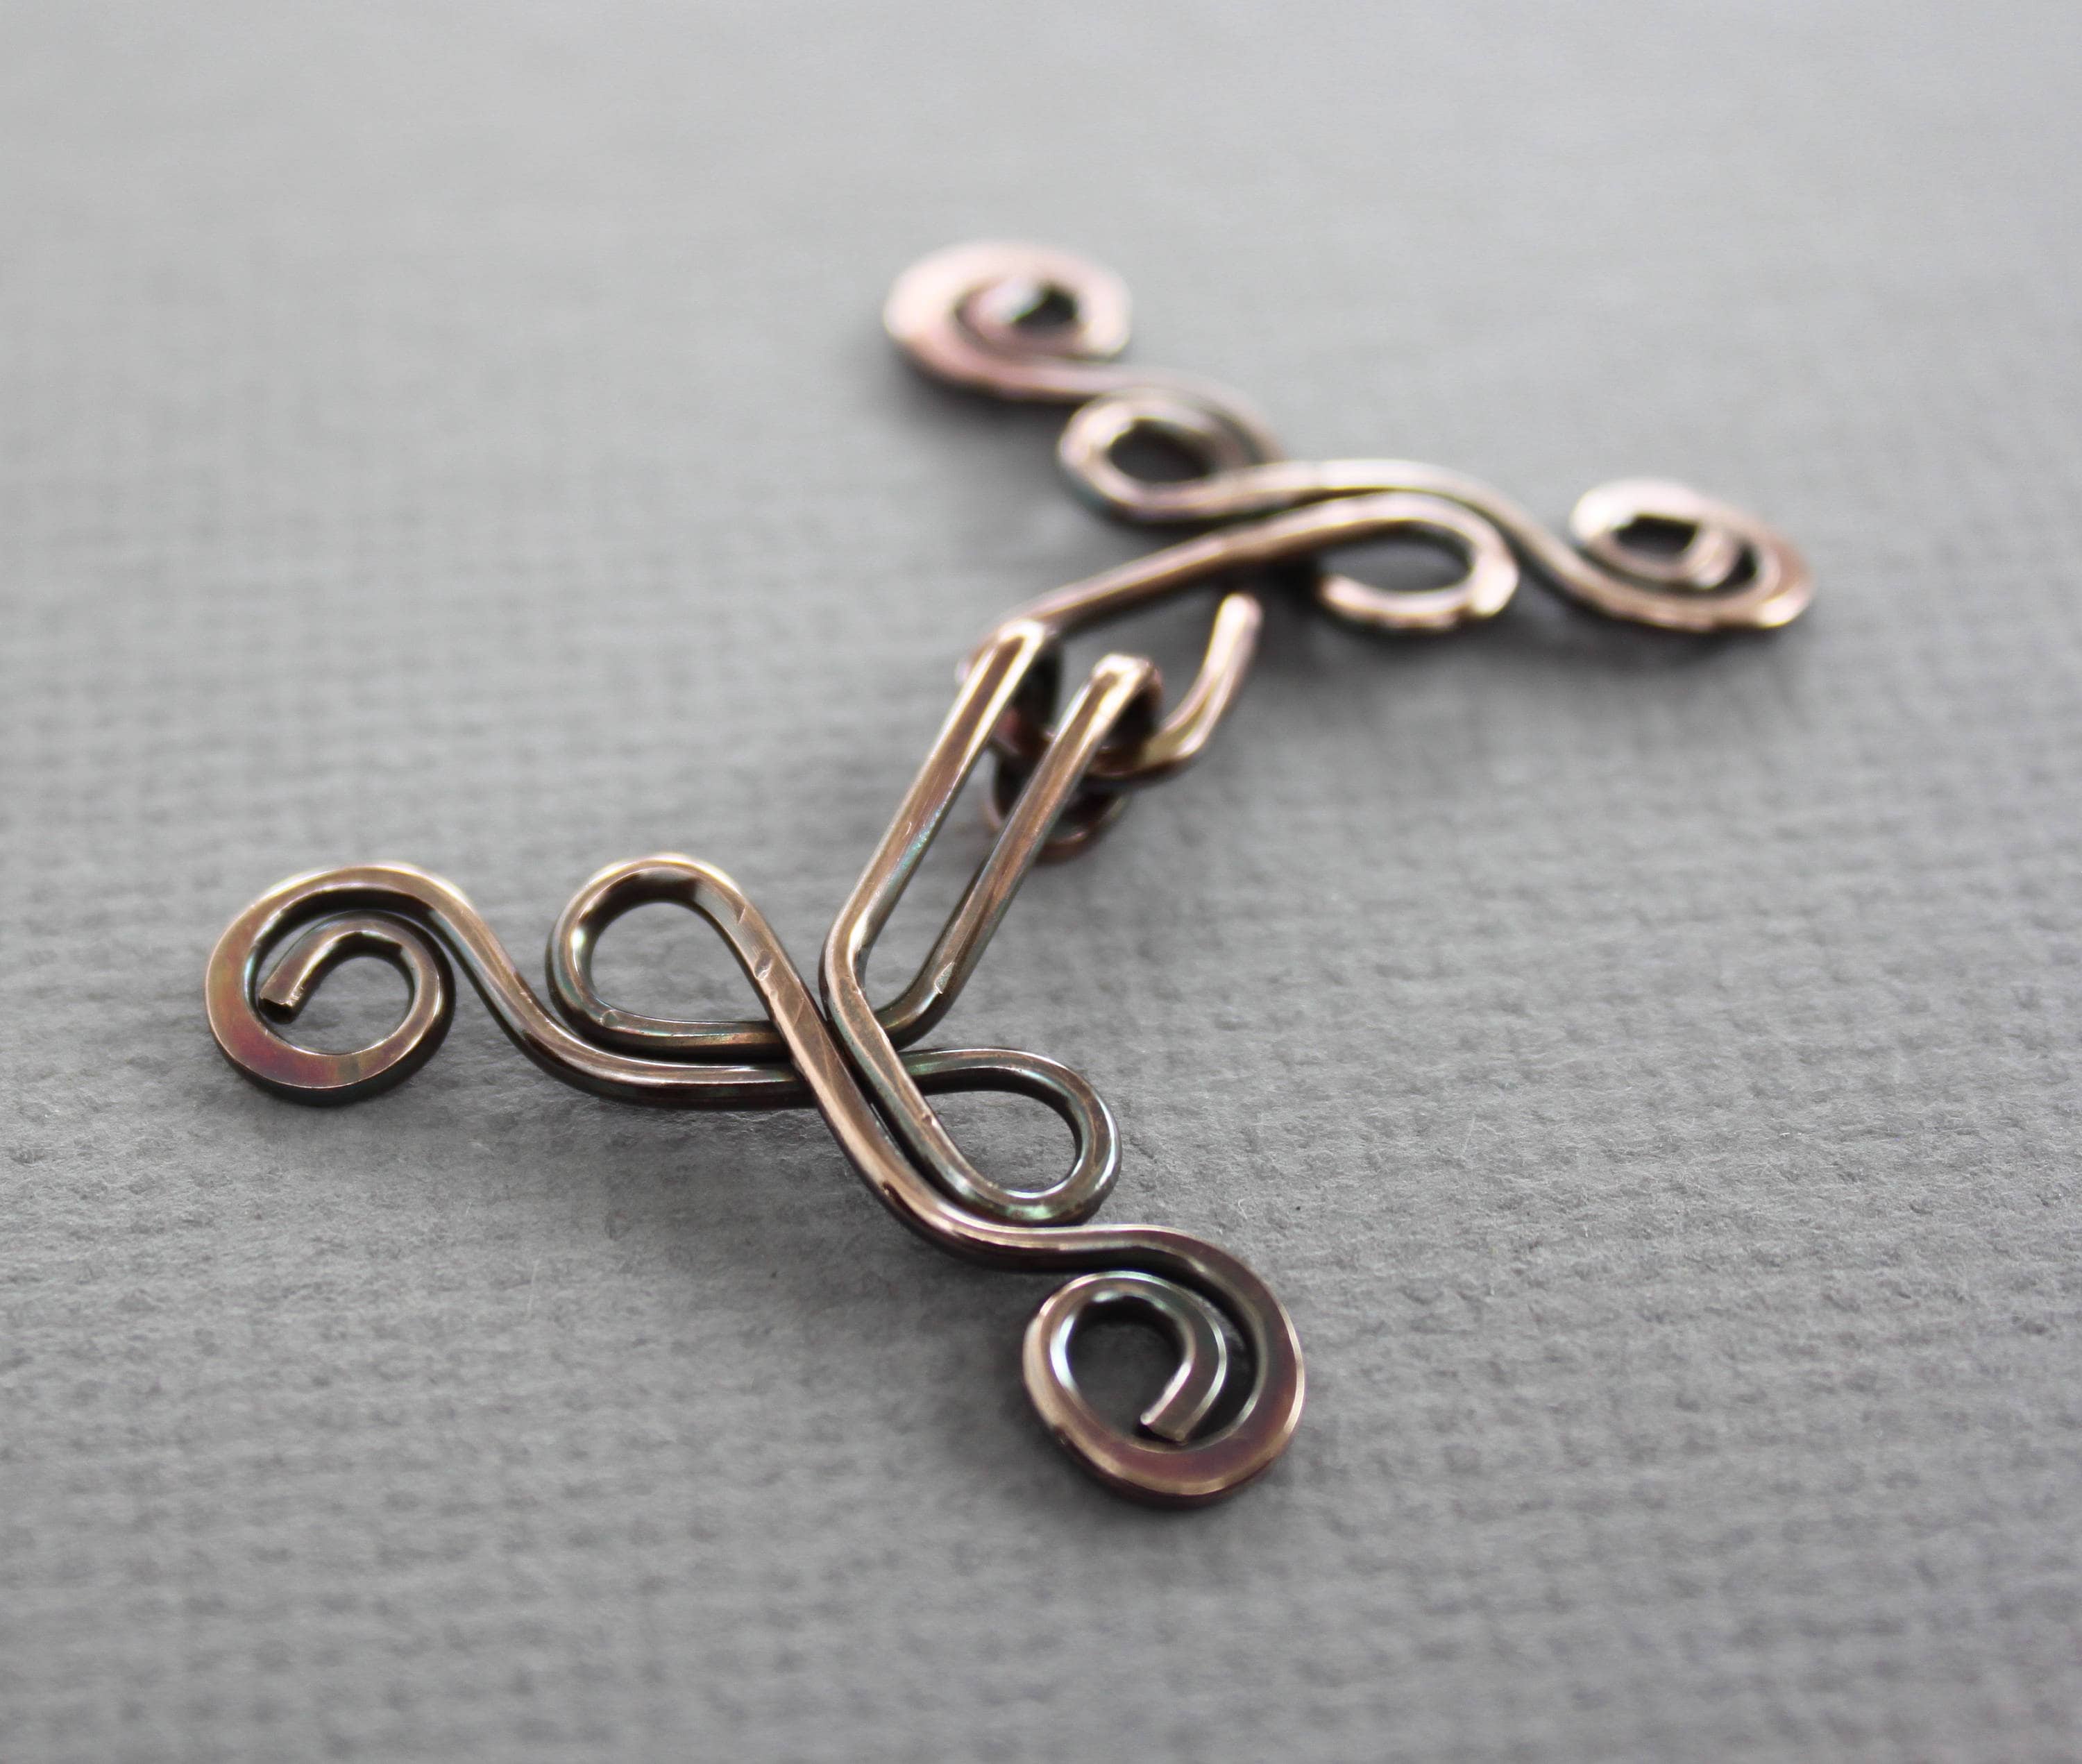 Solid Copper 48x28mm 7 Strand Decorative Heart Hook Clasp Findings • Q3 • 28920 